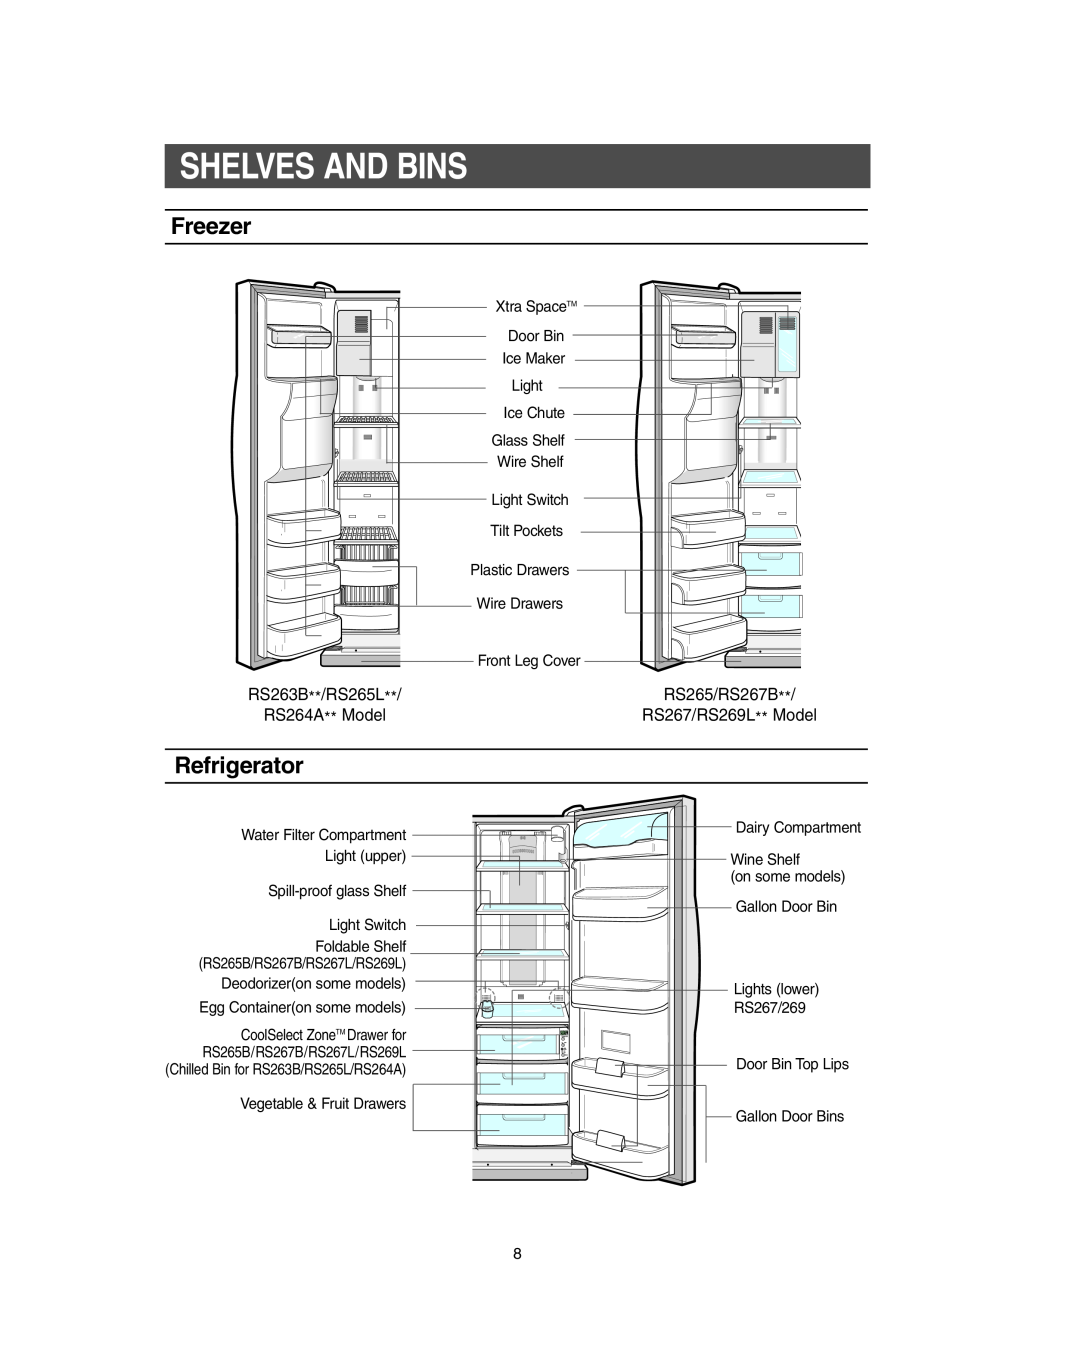 Samsung RS267LBSH owner manual Shelves And Bins, Freezer, Refrigerator, RS263B**/RS265L, RS265/RS267B, RS264A** Model 